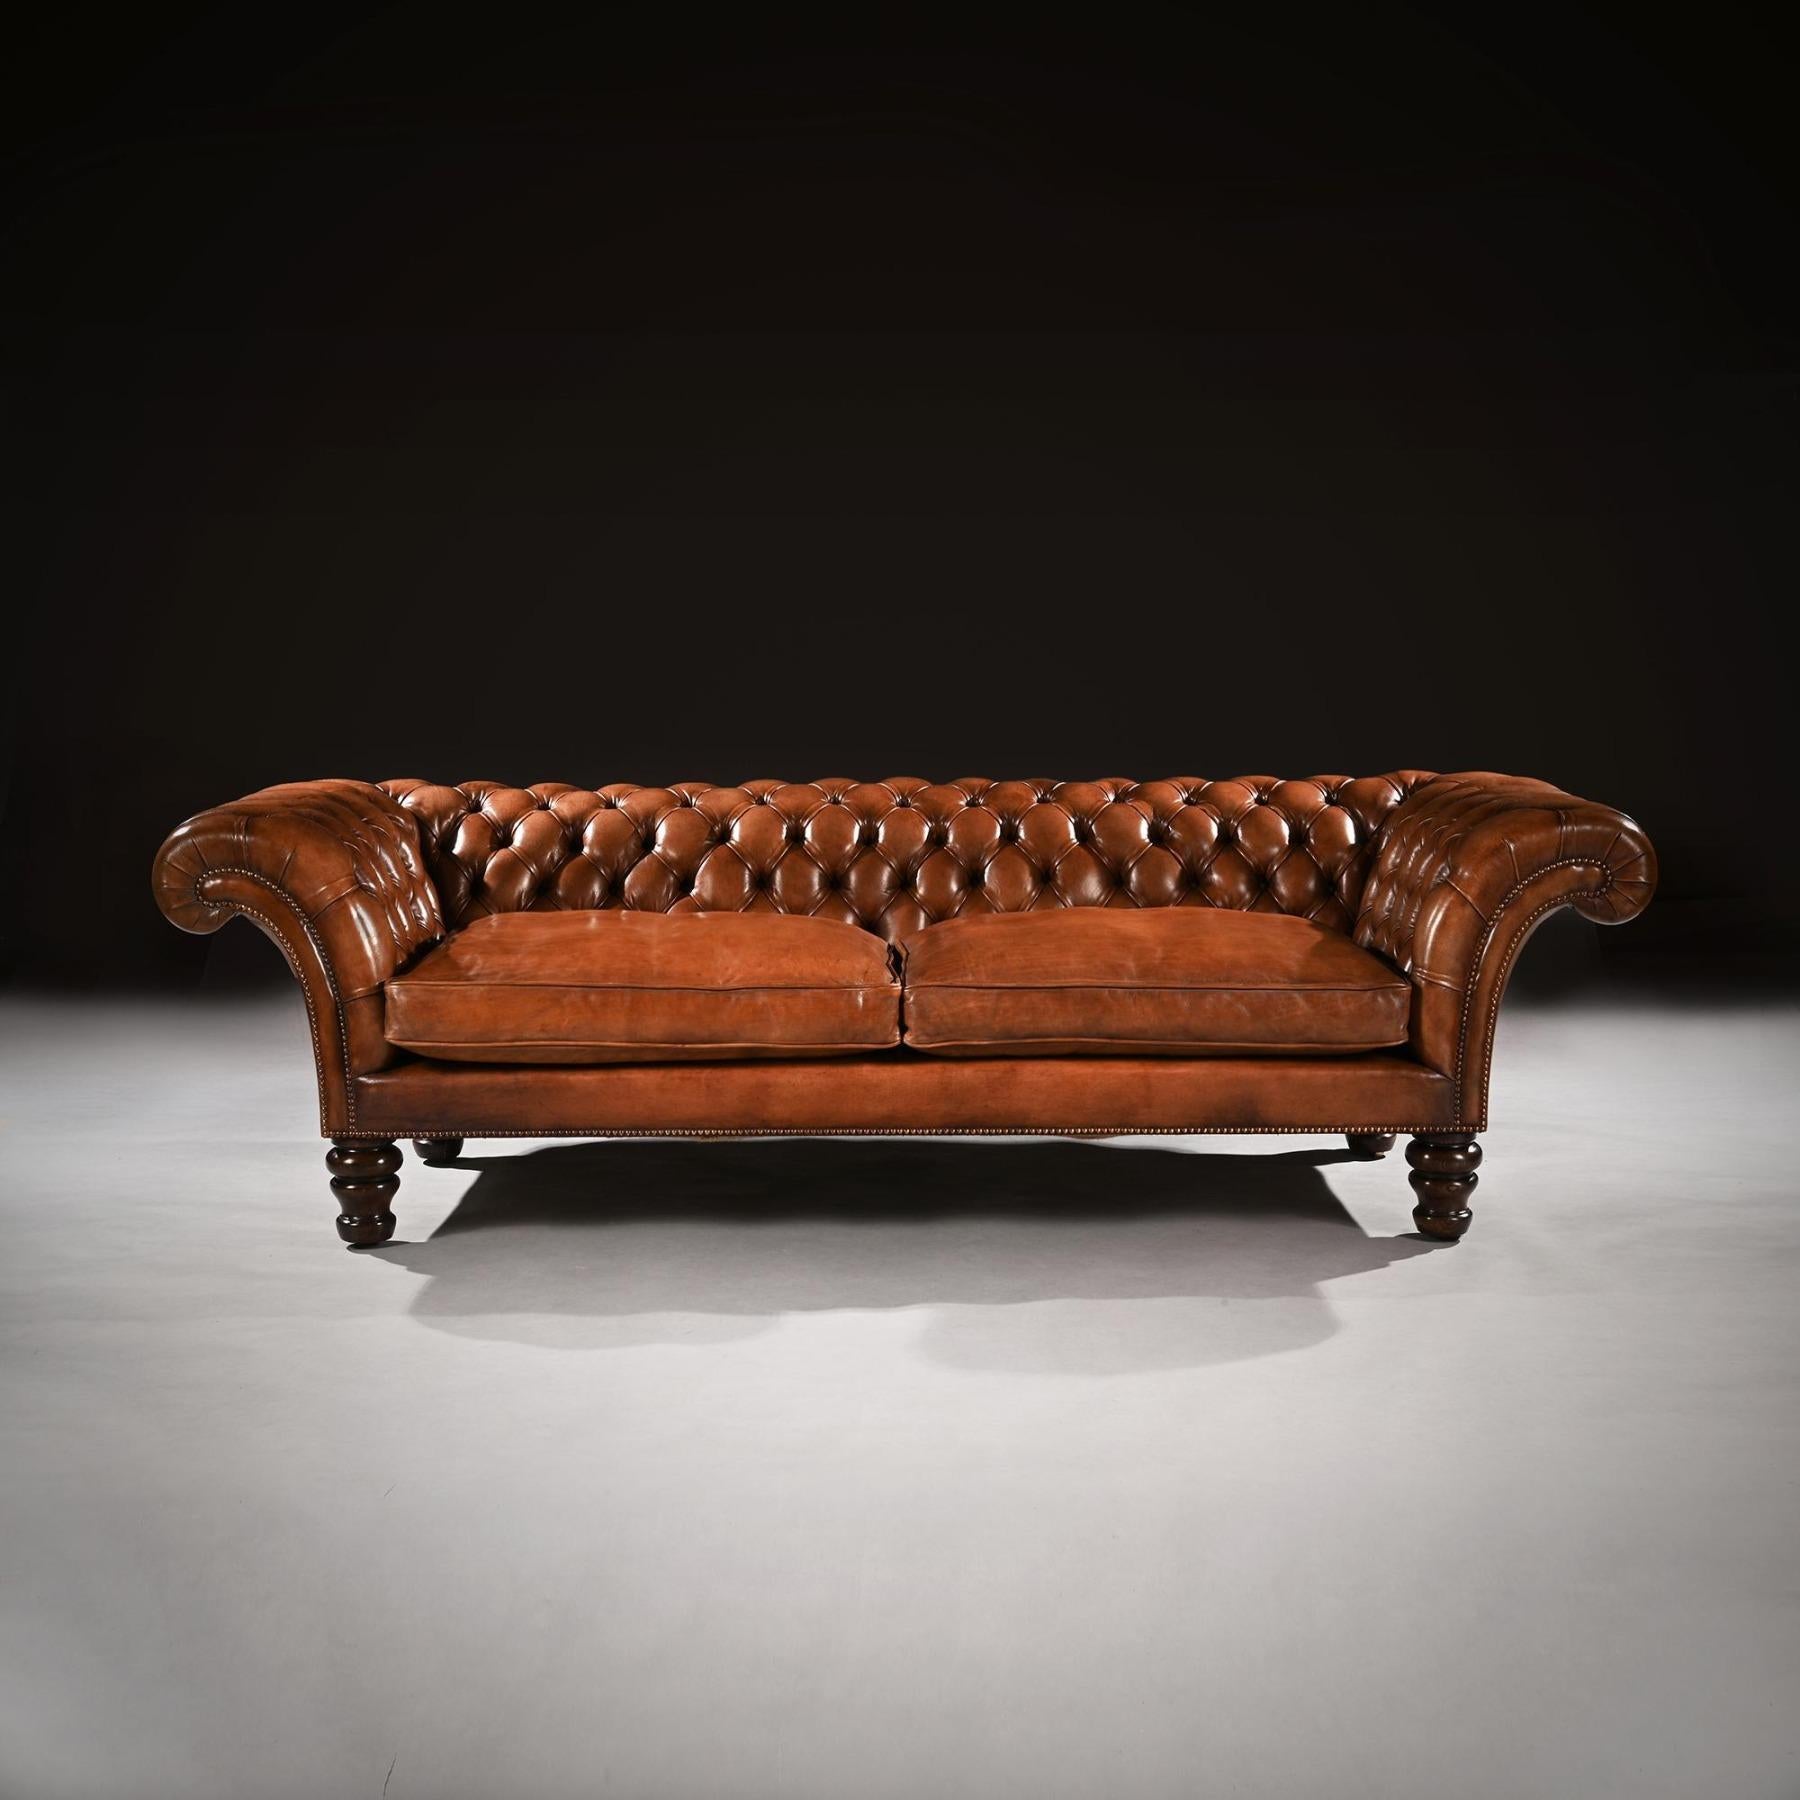 An exceptionally well drawn 19th century Victorian tufted tan / brown leather upholstered Chesterfield sofa, on solid rosewood turned legs.



English Circa 1860.



This extremely elegant Victorian chesterfield sofa stands at 8 feet wide,